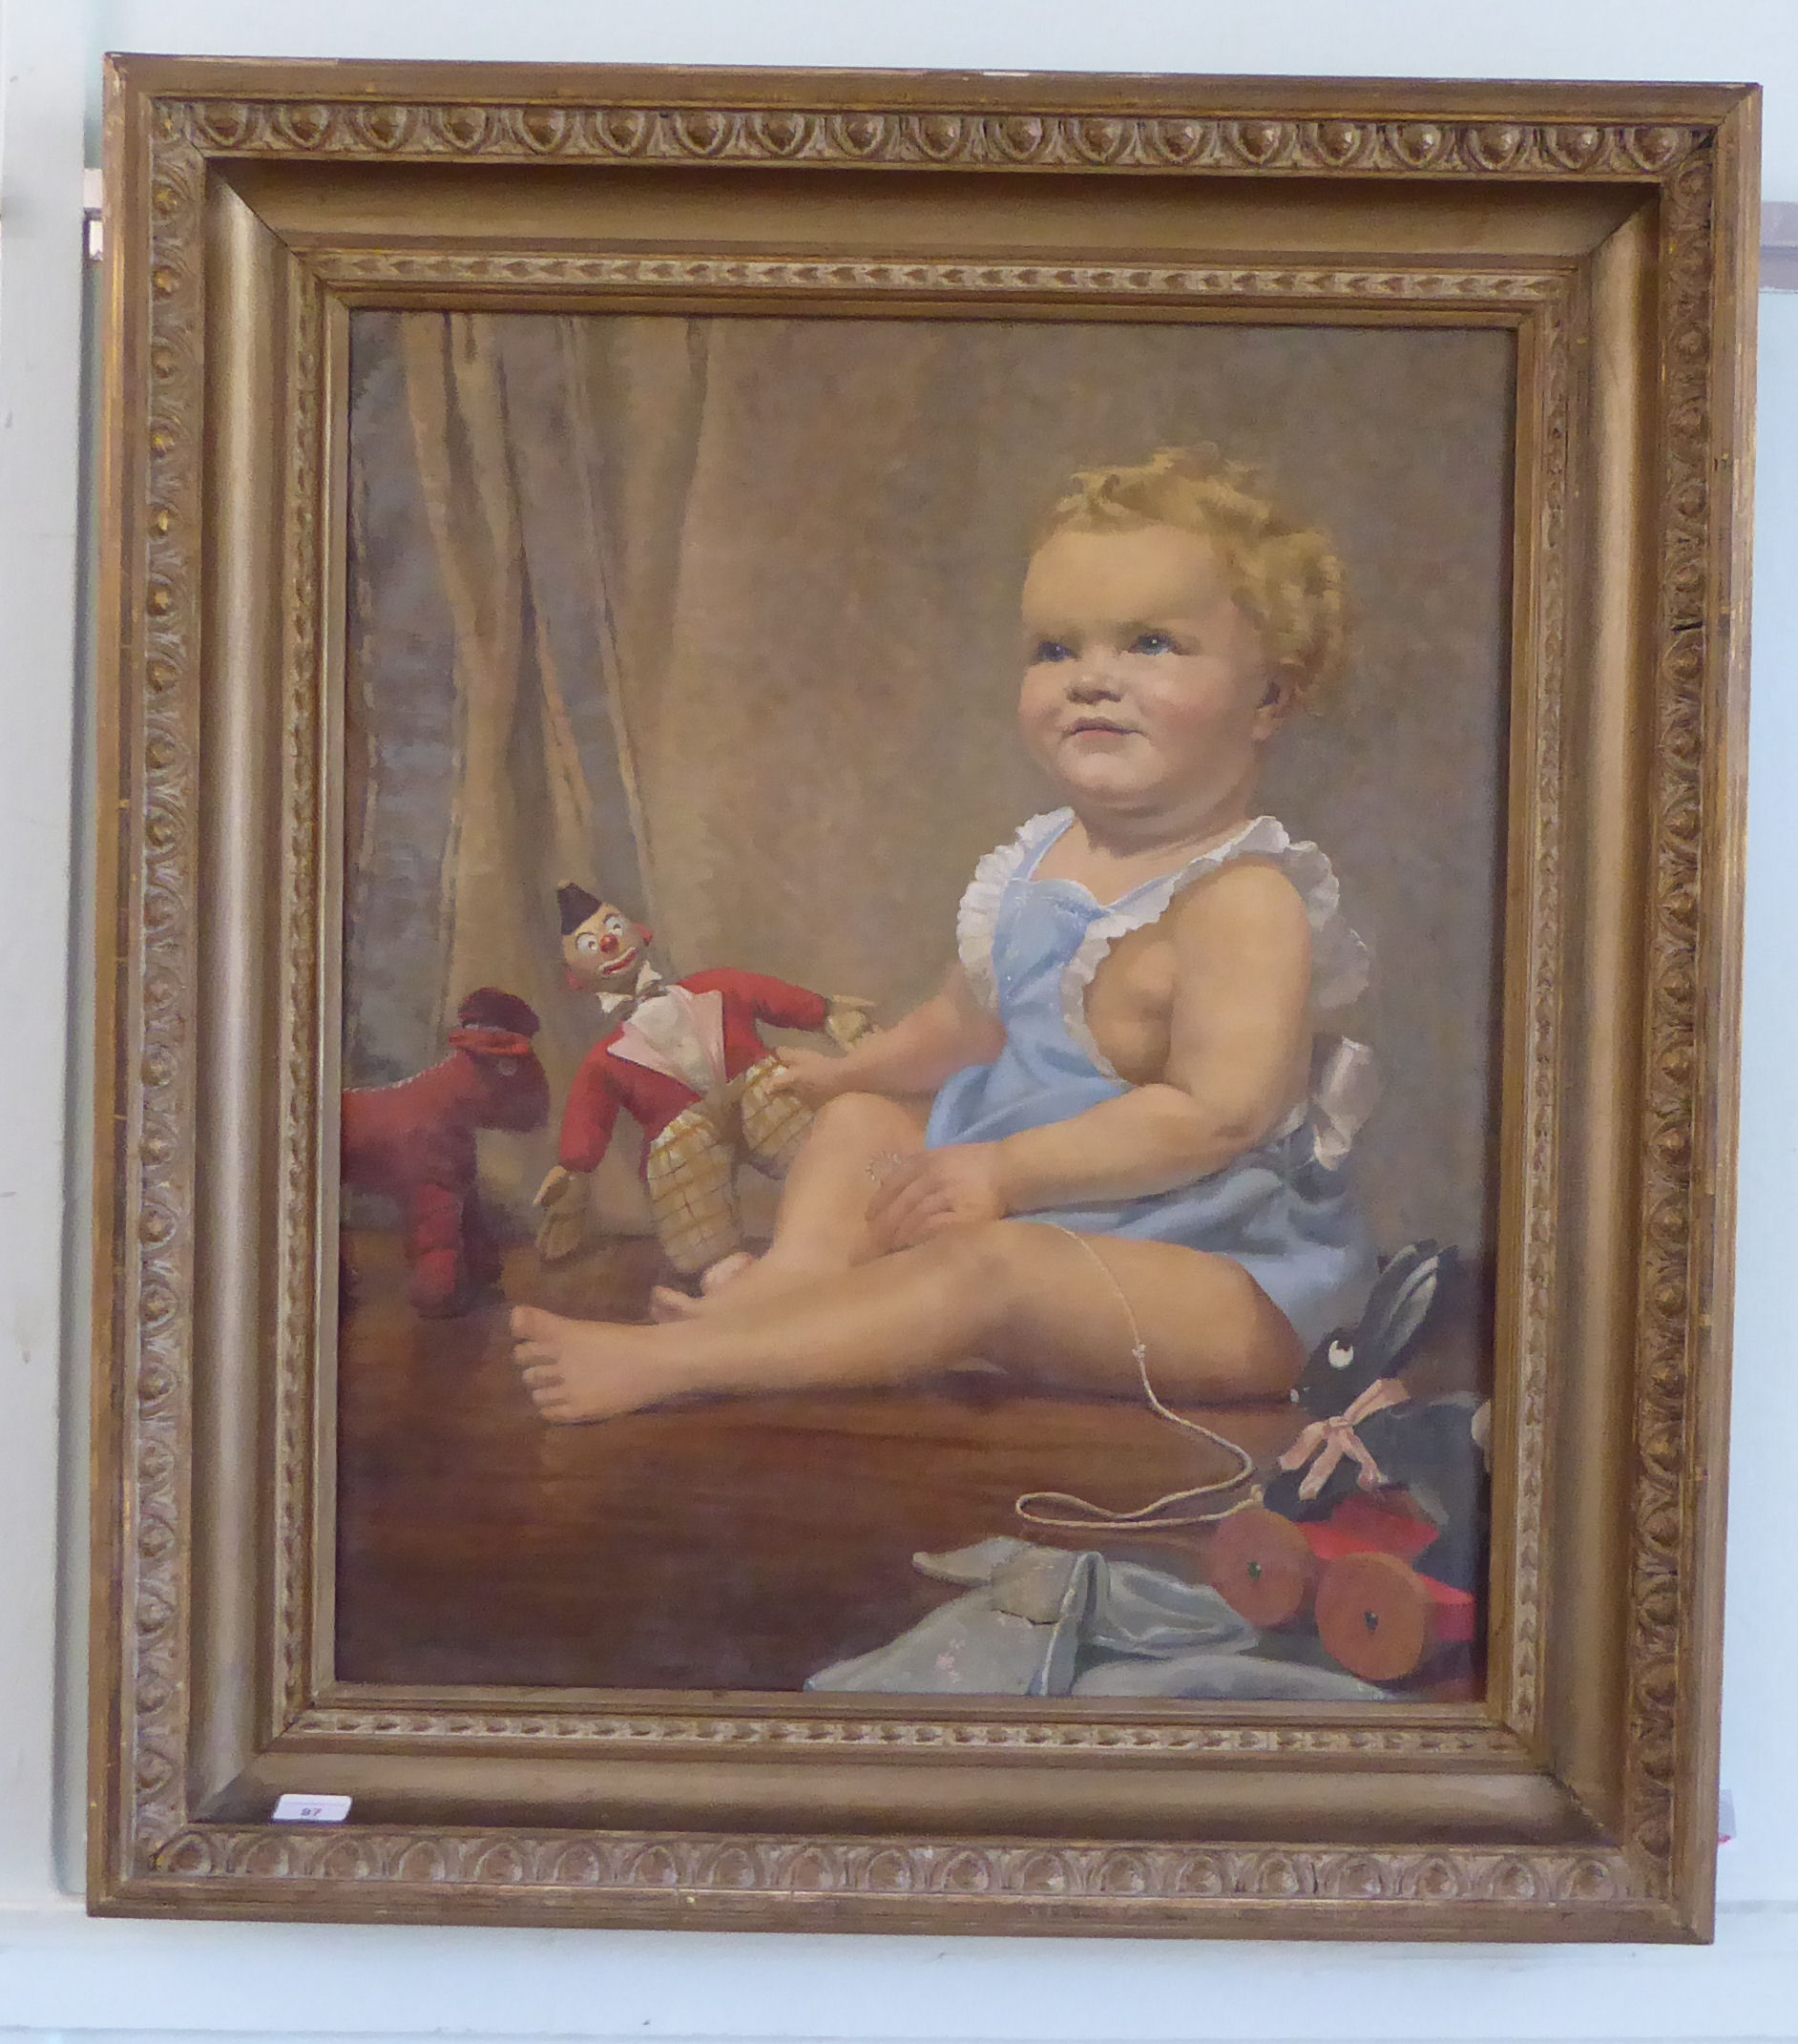 Marjorie Rodgers - a study of a young child playing with toys  oil on canvas  bears a signature